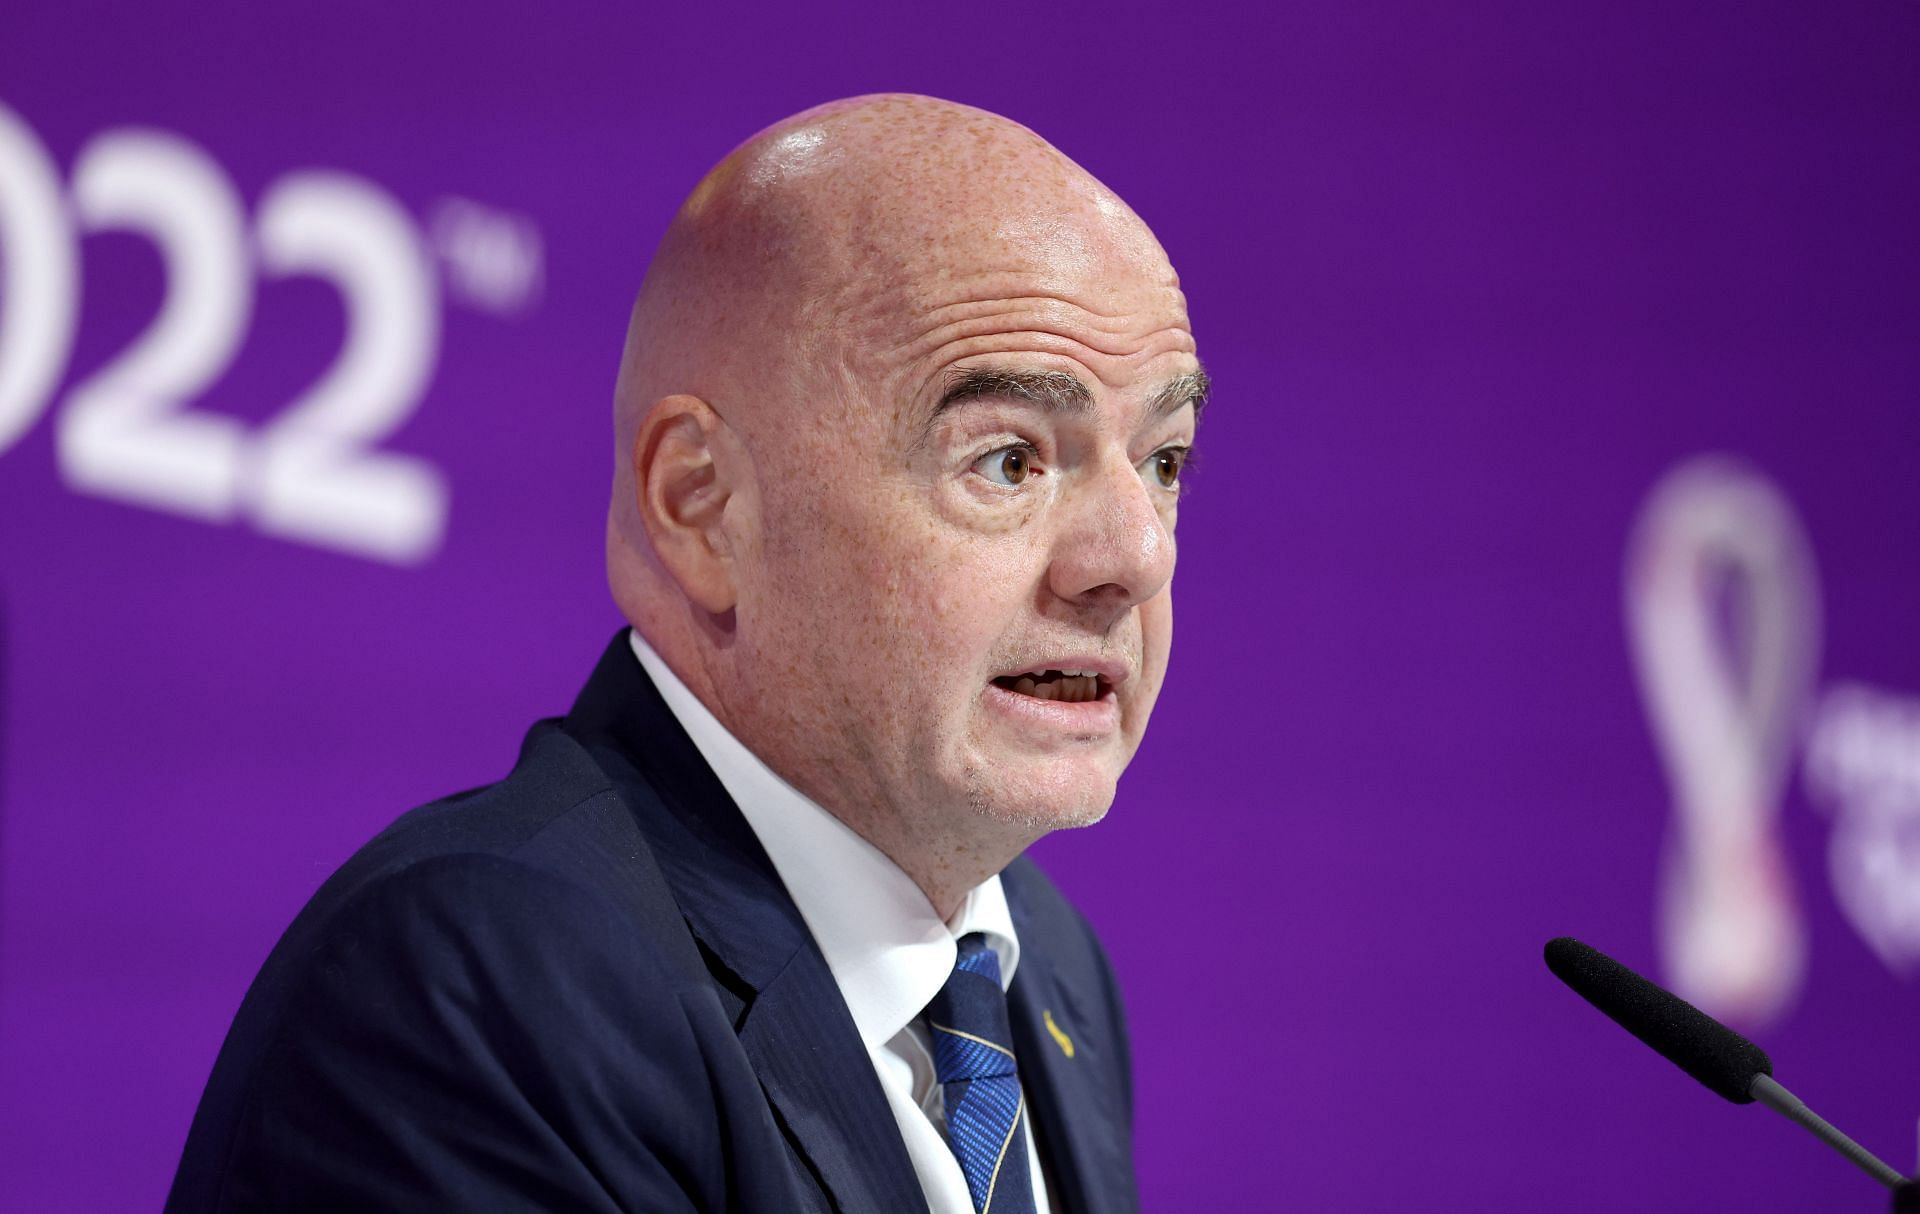 Gianni Infantino sparked further controversy with his pre-tournament speech.